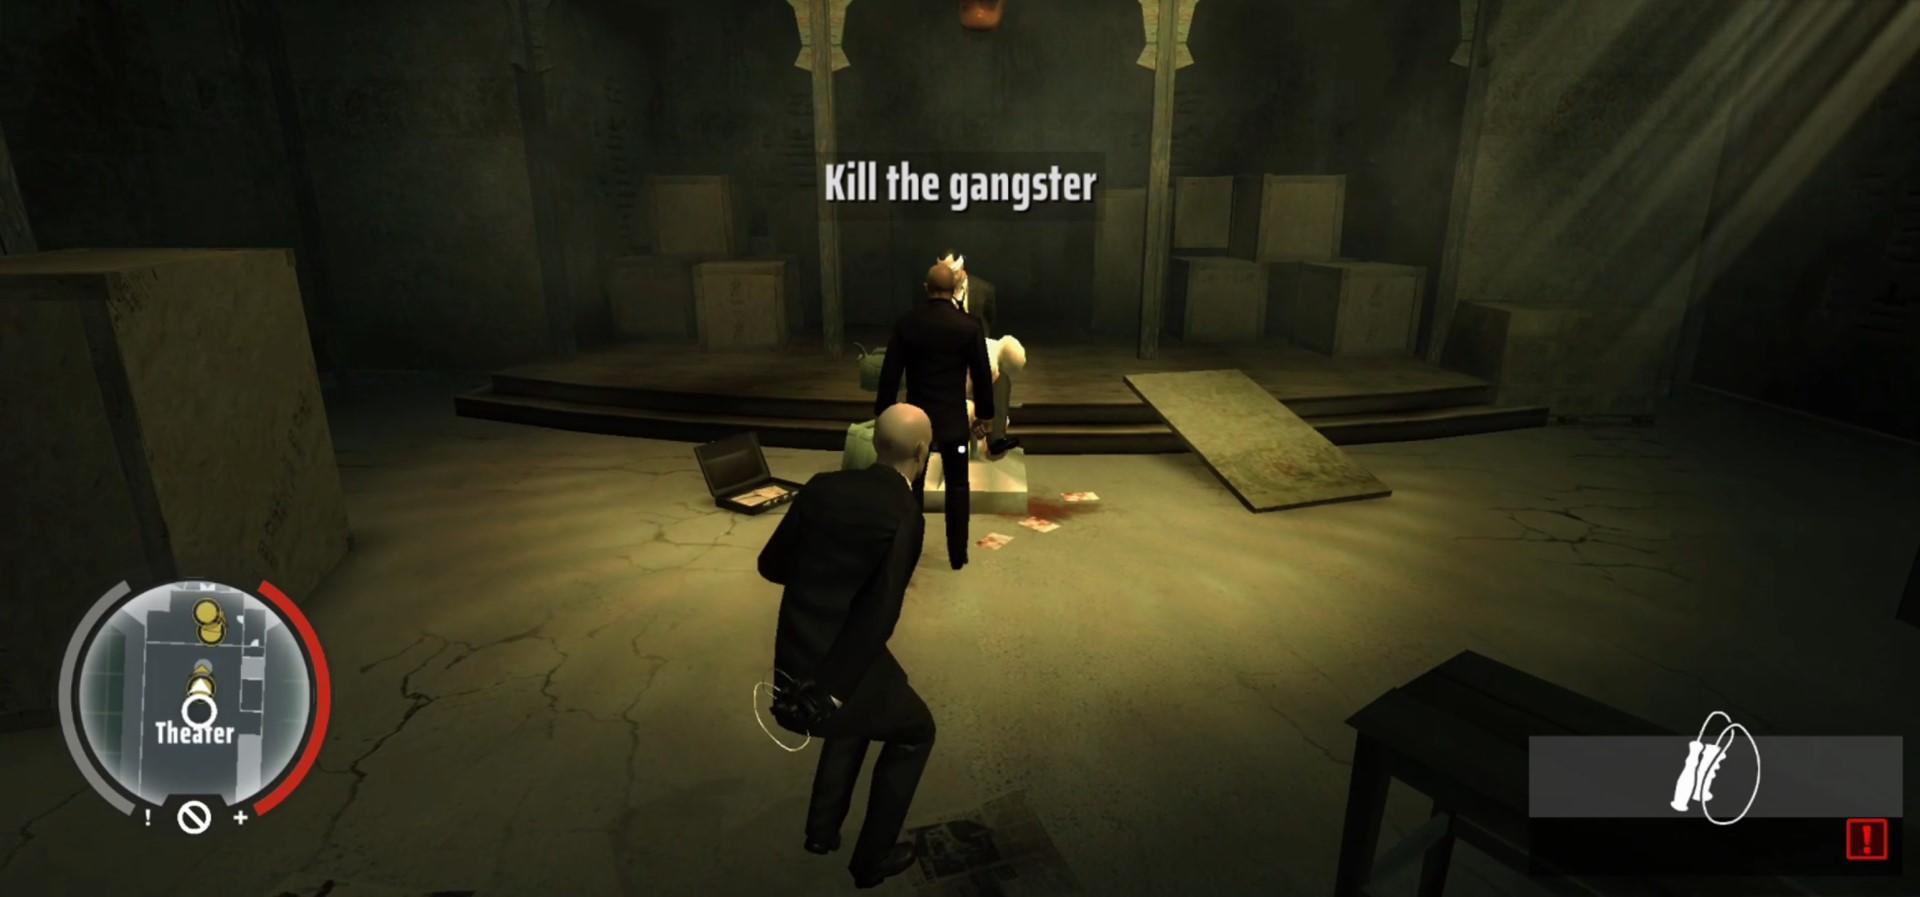 Hitman: Blood Money arrives on mobile with some awesome new updates and a few annoying issues